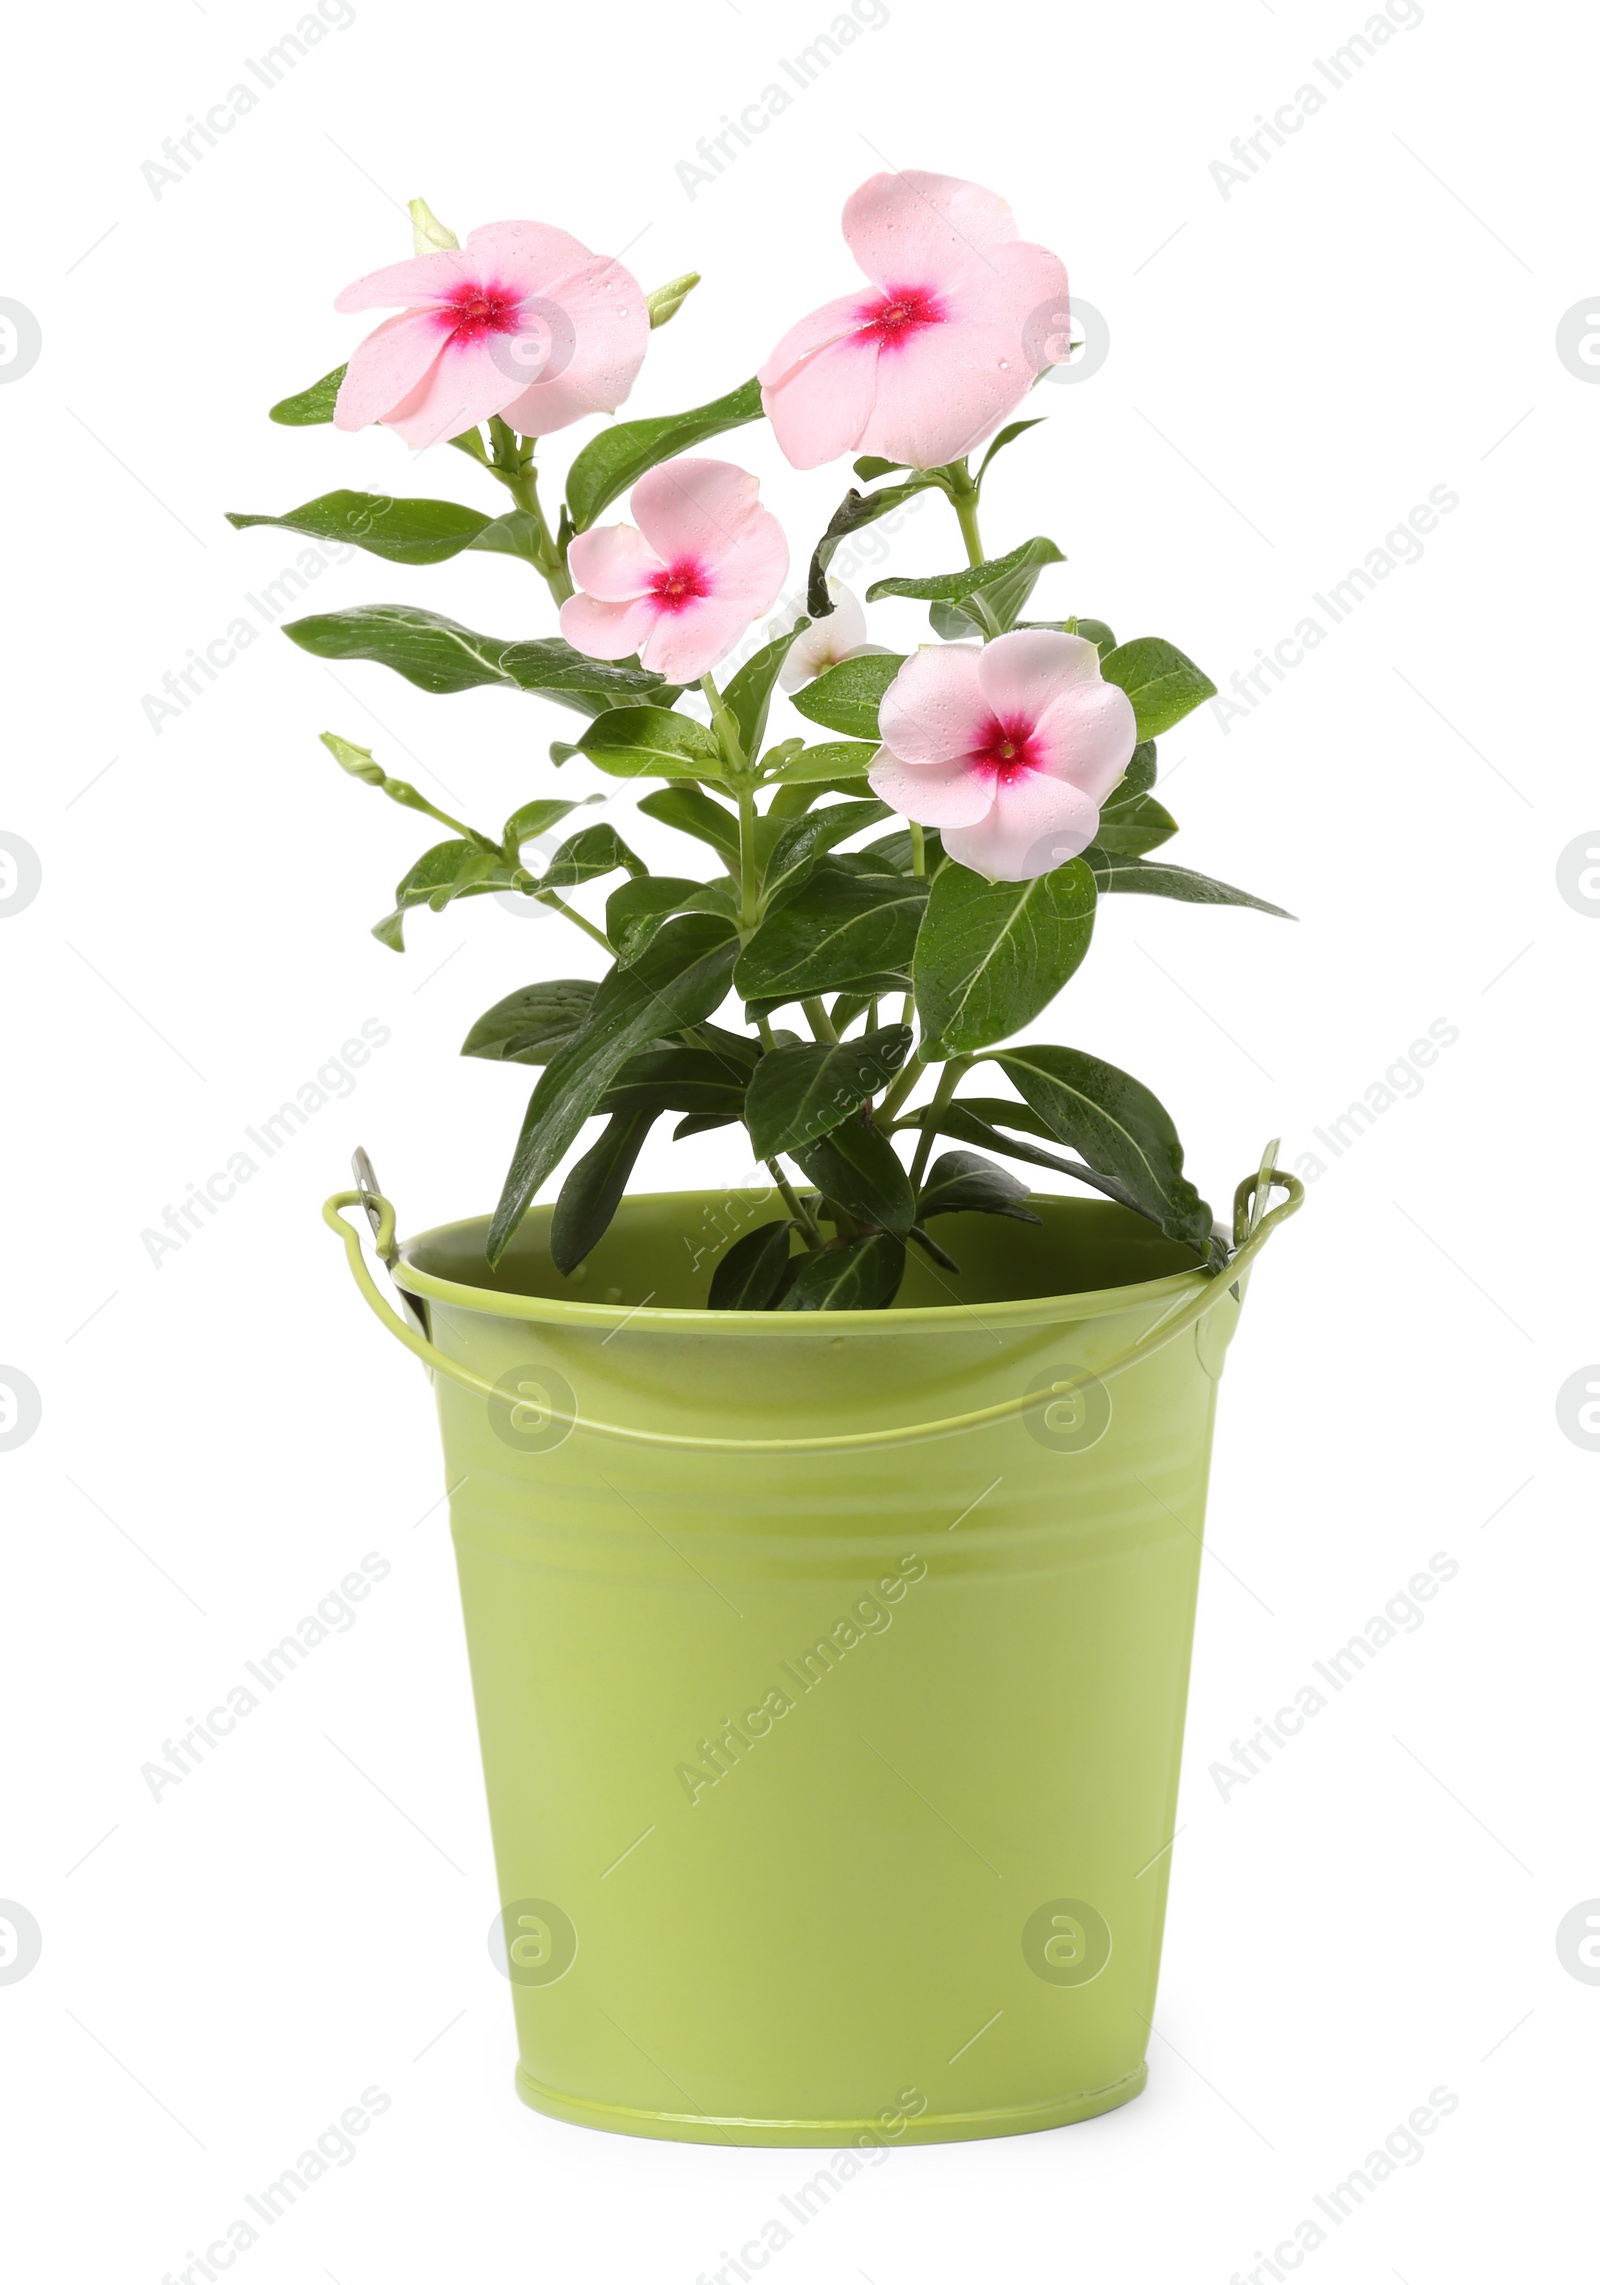 Photo of Catharanthus roseus in green flower pot isolated on white